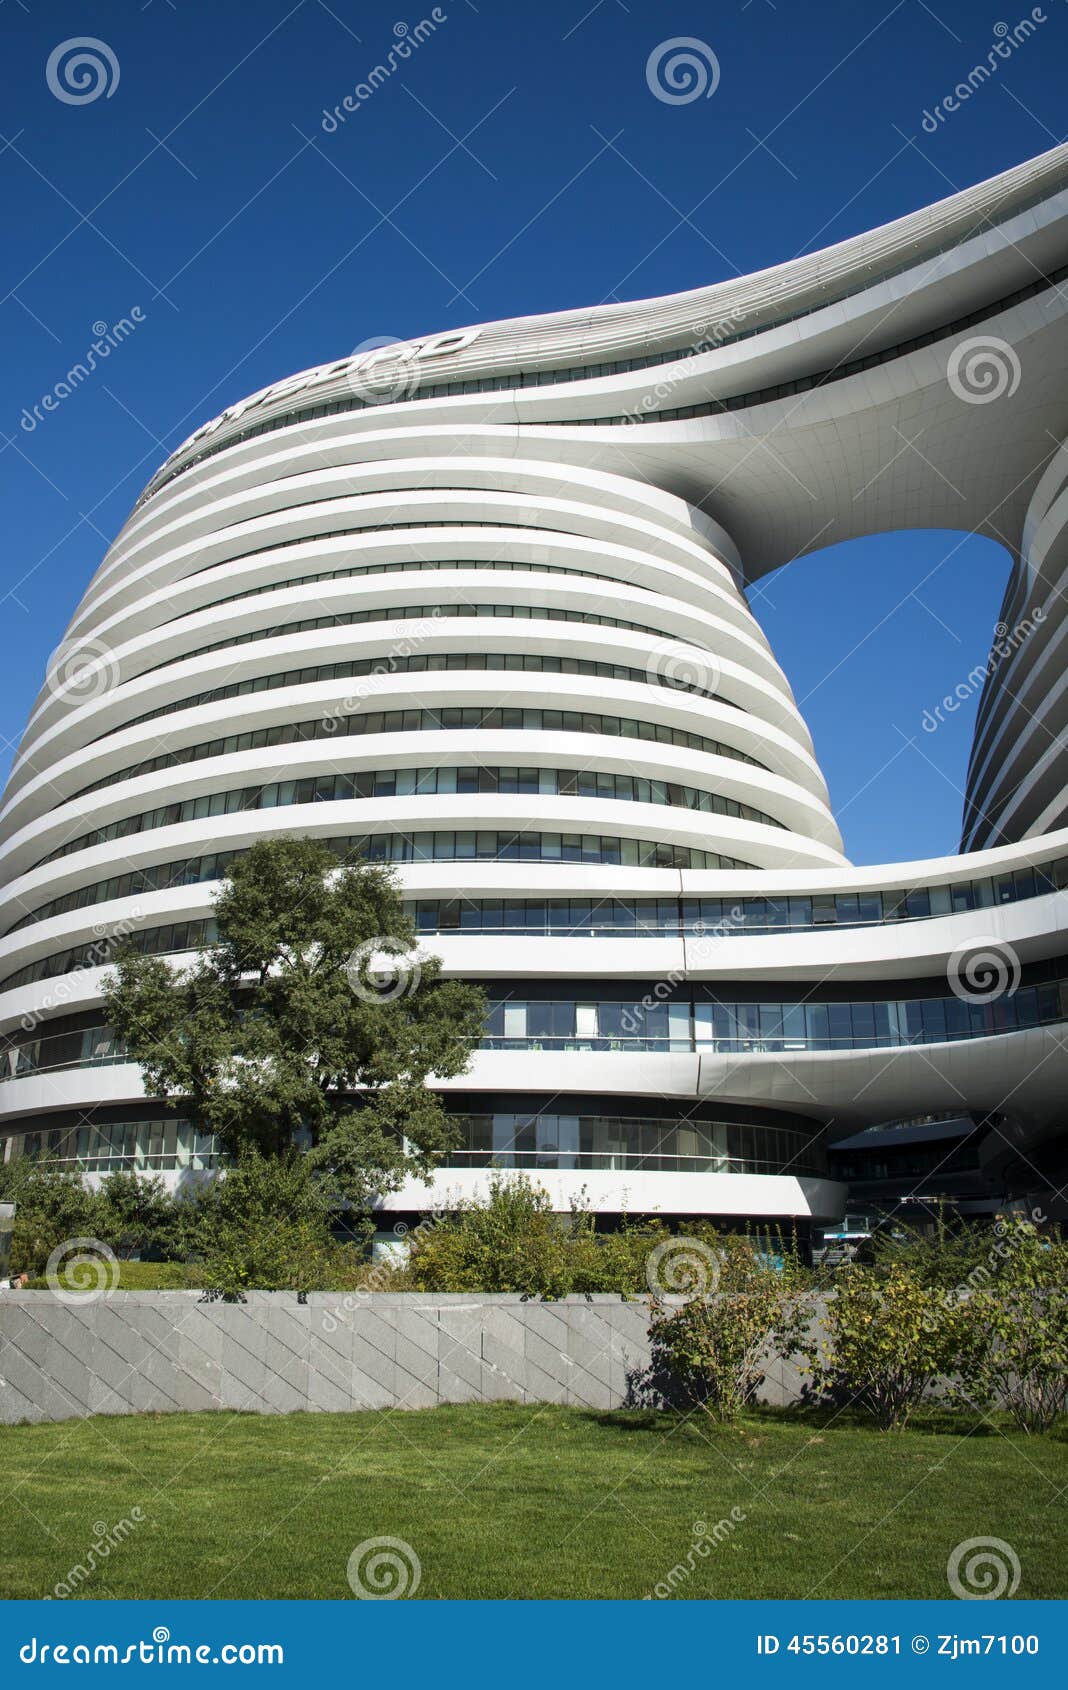 In Asia, China, Beijing, SOHO, the Milky Way, Modern Architecture ...